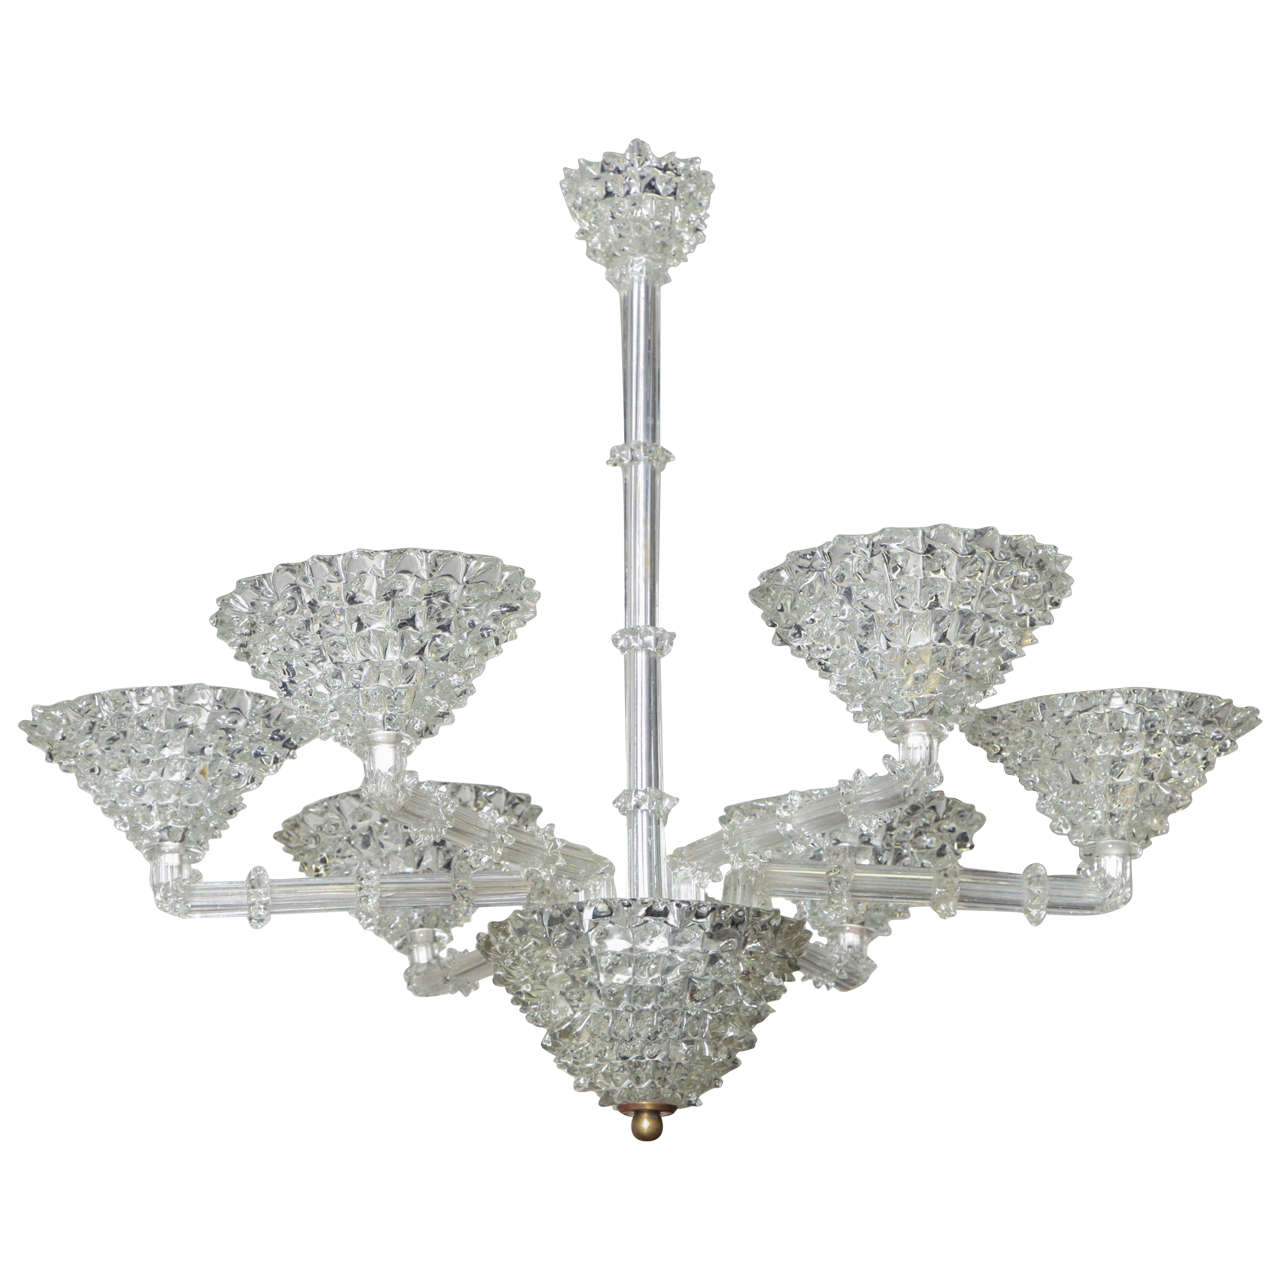 Barovier Toso Chandelier Made in Venice